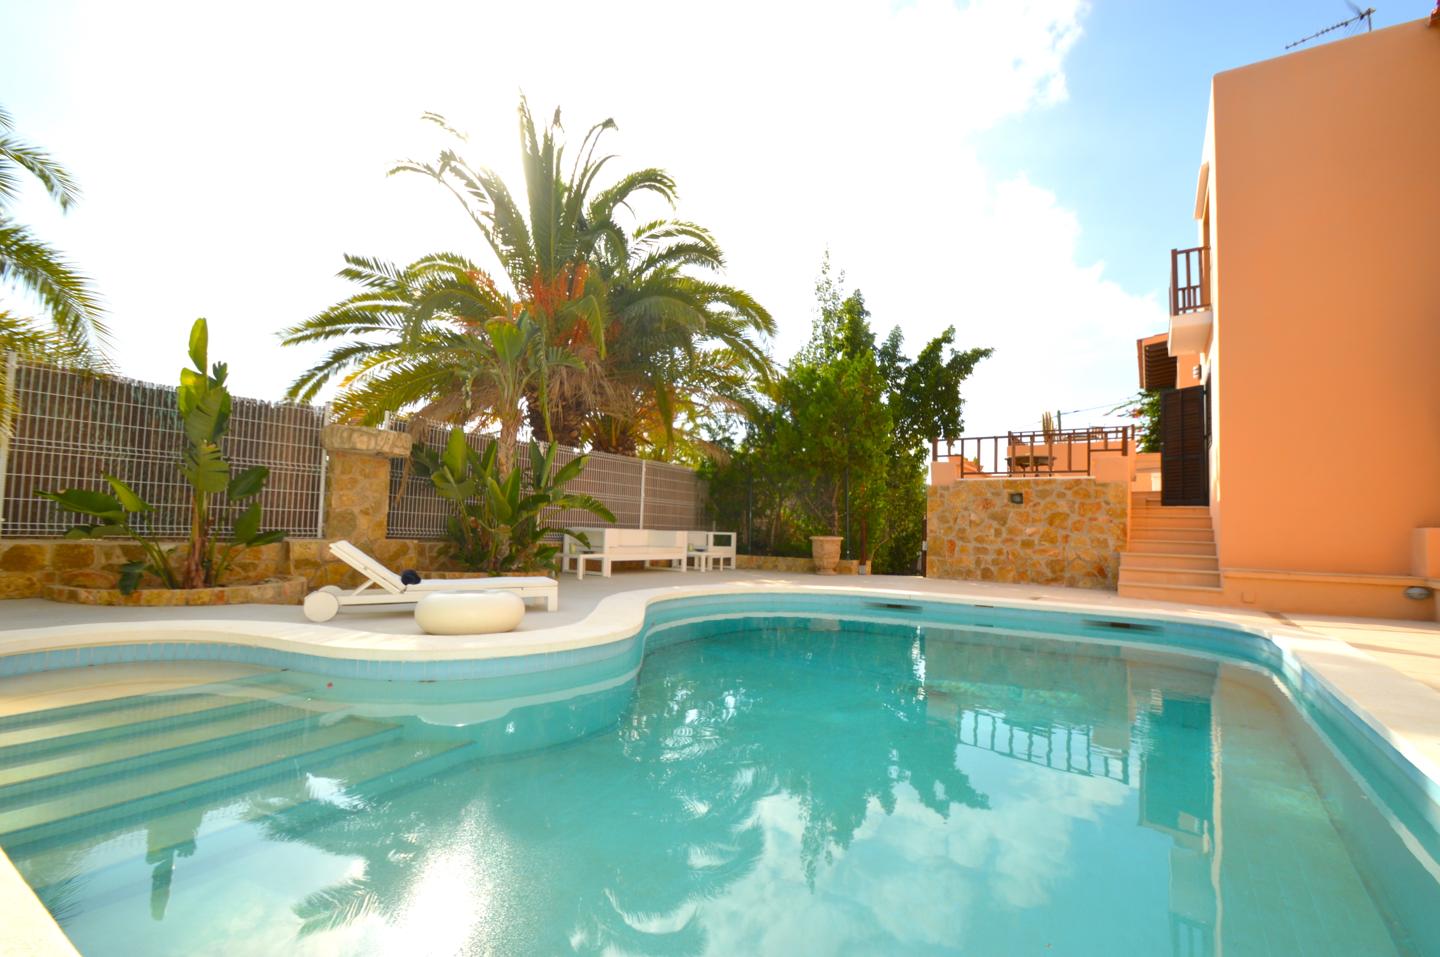 This beautiful Villa with 9 rooms for sale in San Miguel